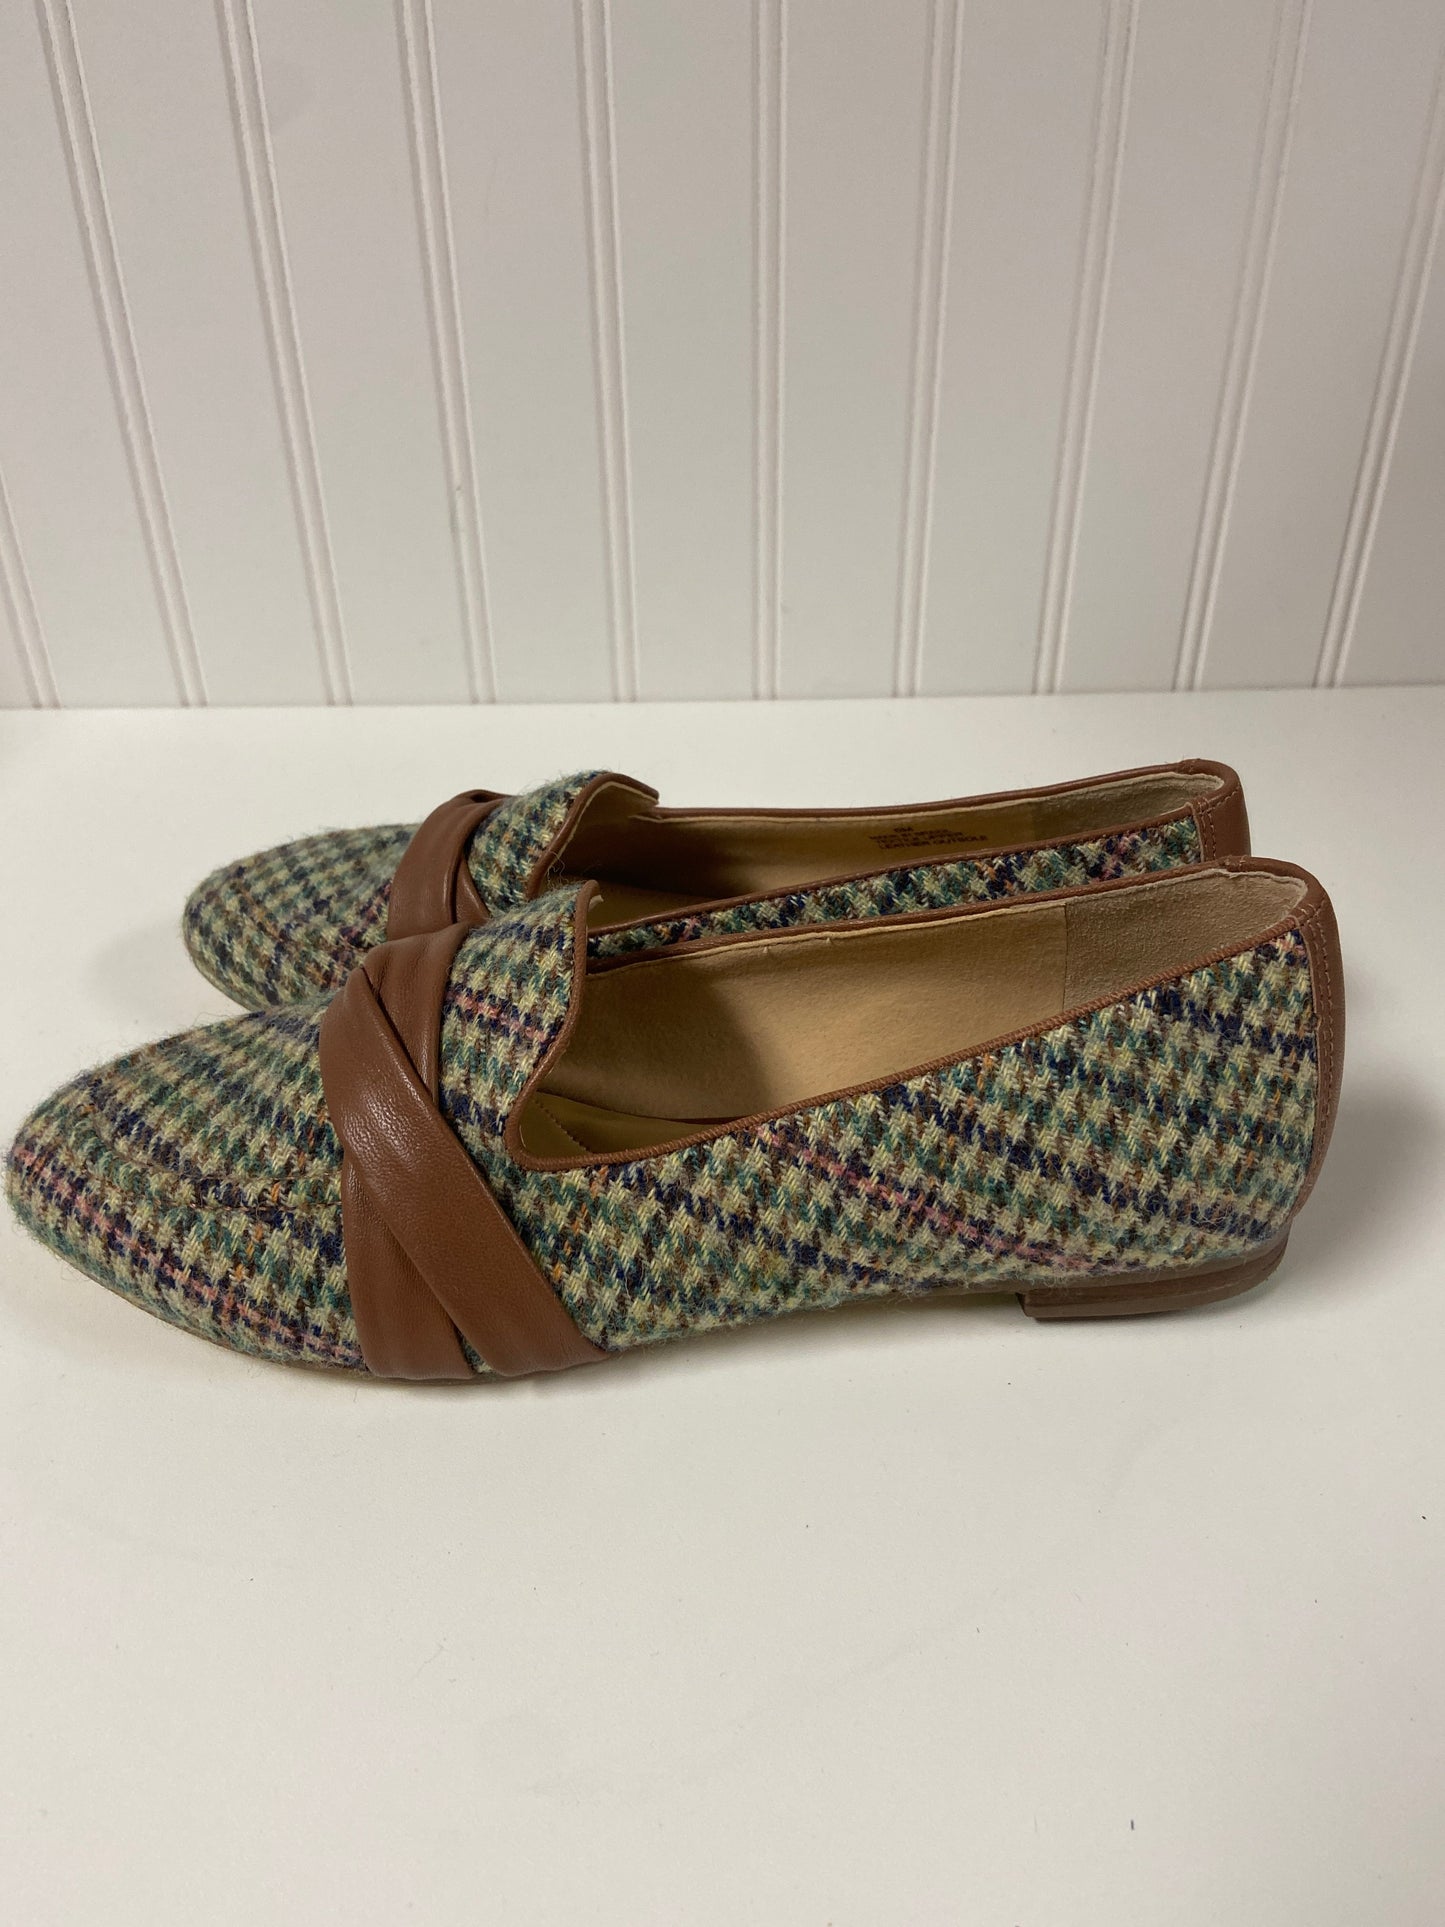 Shoes Flats By Talbots  Size: 6